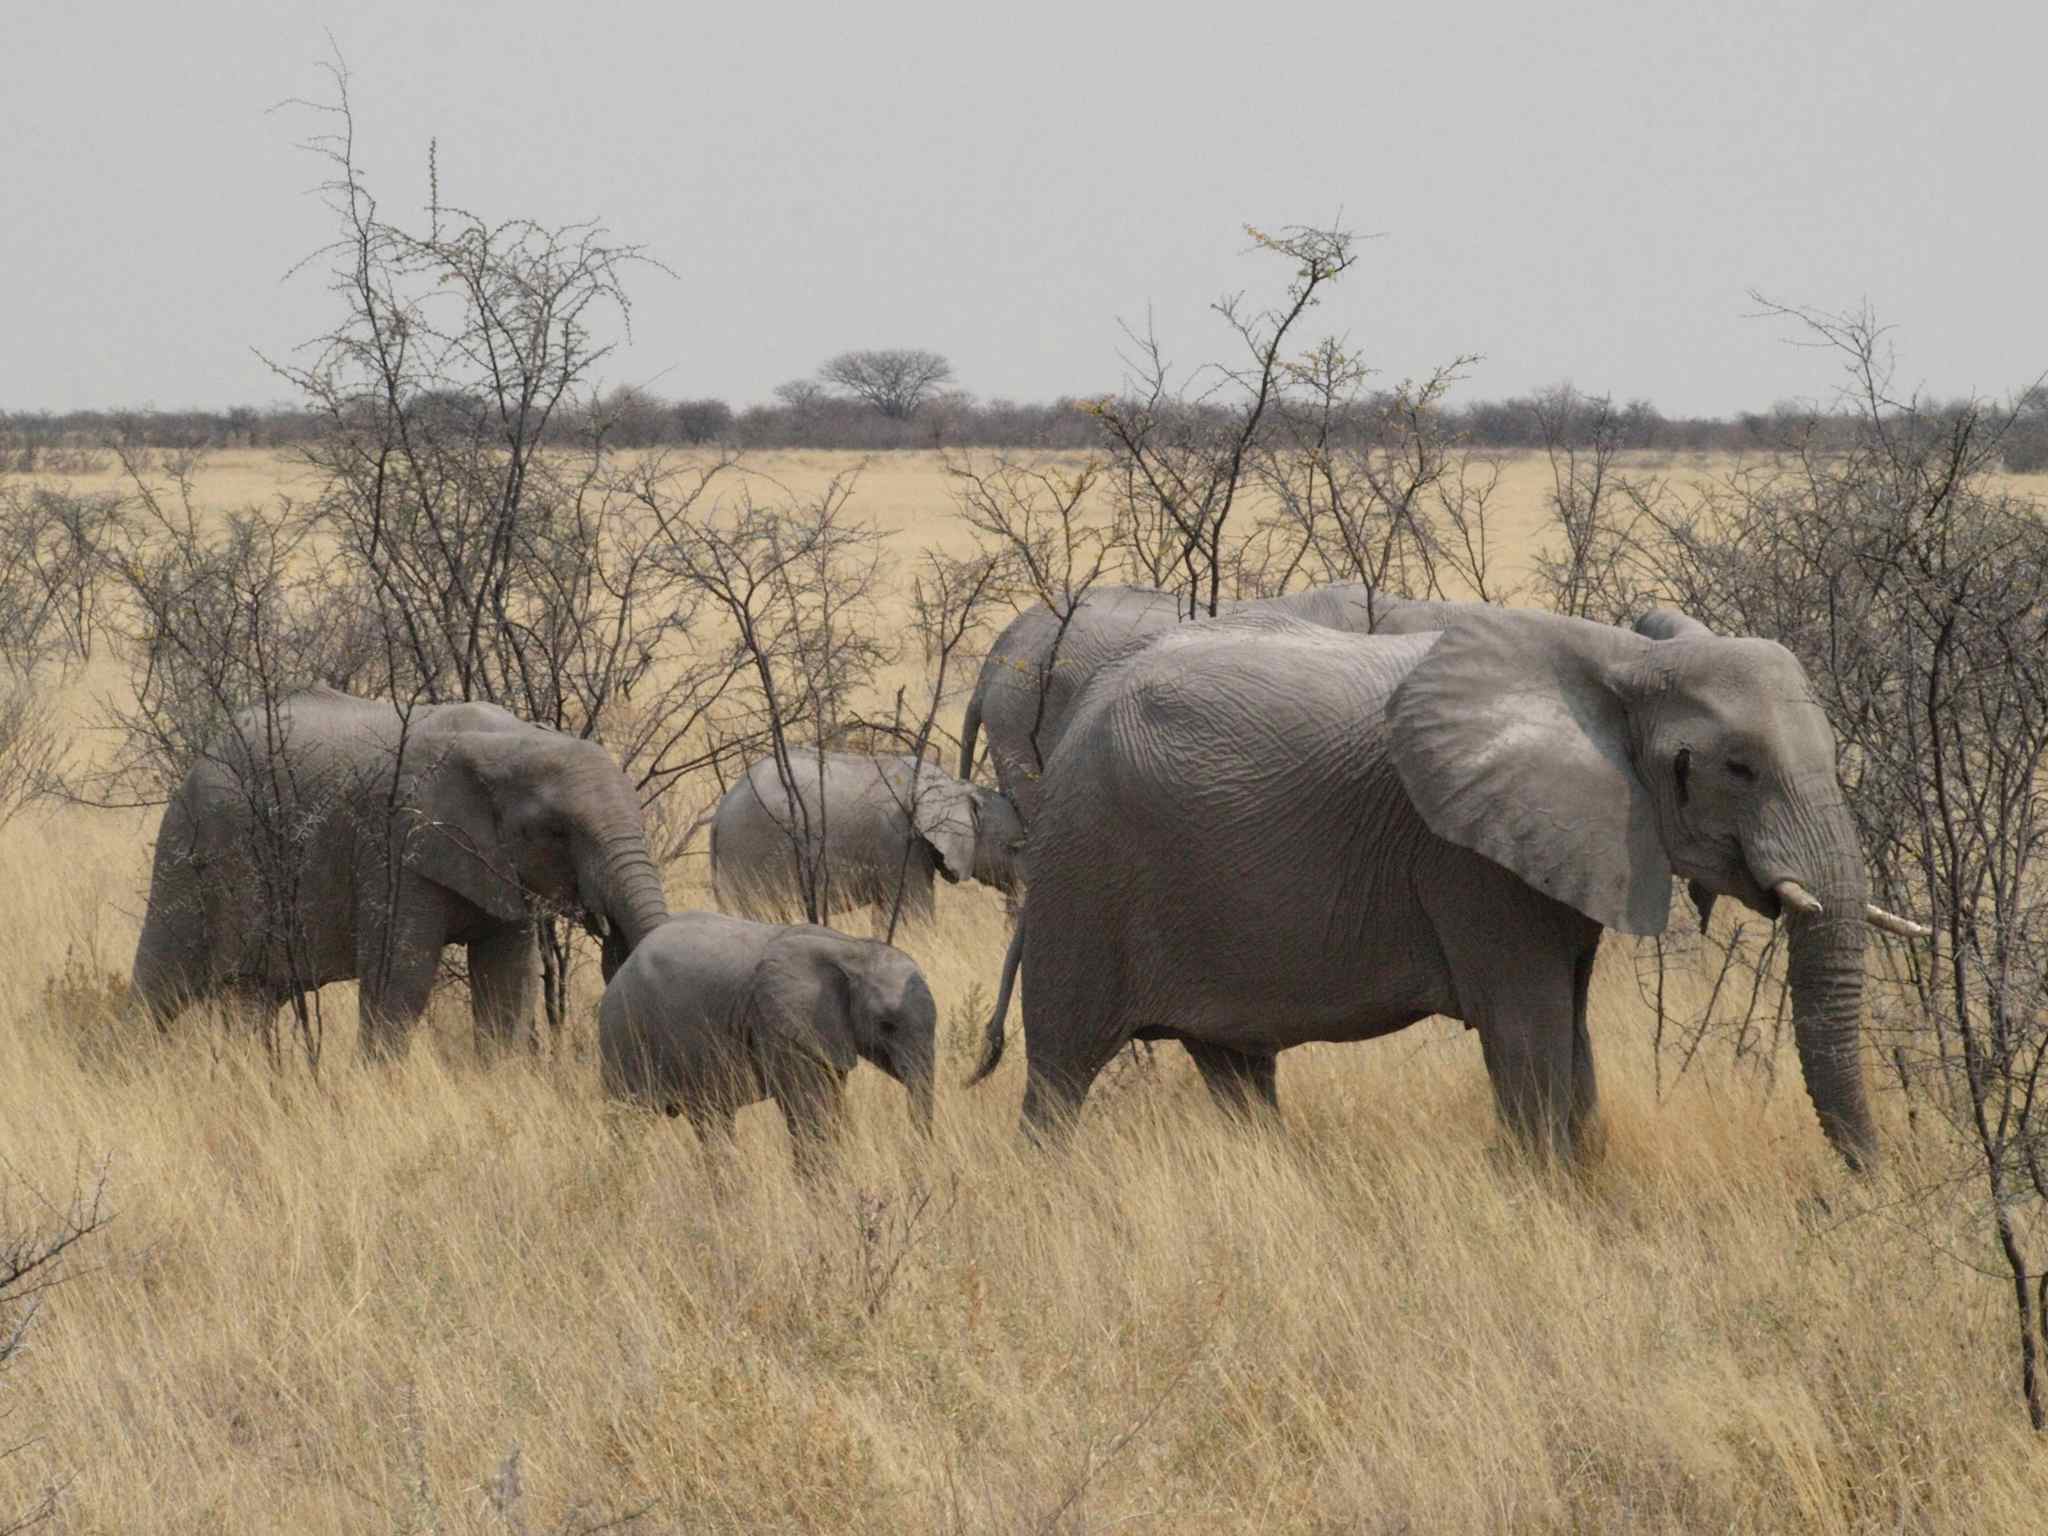 elephants and their baby, etosha national park, namibia: Much Better Adventures/Ruth Howarth